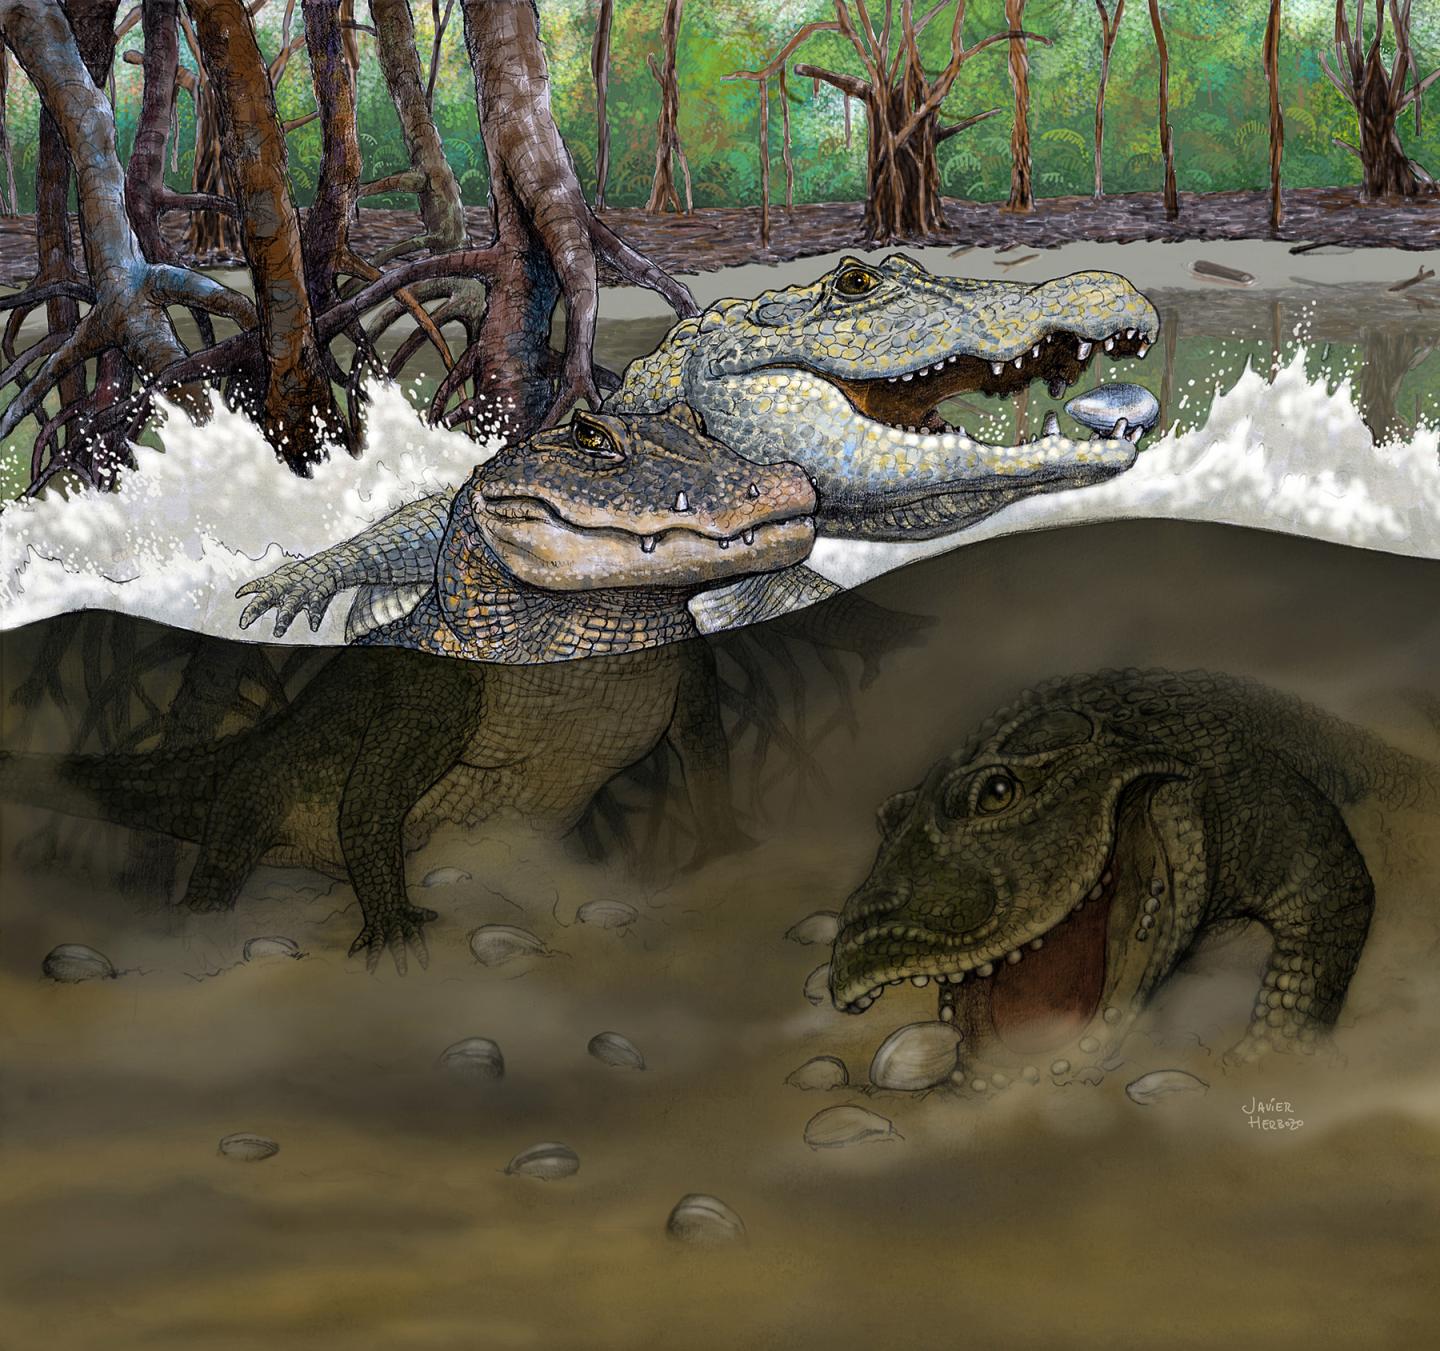 Prehistoric Crocodile: Artist’s rendition of Amazonian swamps from the Miocene era (about 13 million years ago) and the three new species of crocodiles uncovered in northeastern Peru: Kuttanacaiman iquitosensis (left), Caiman wannlangstoni (right), and Gnatusuchus pebasensis (bottom). (© Javier Herbozo)